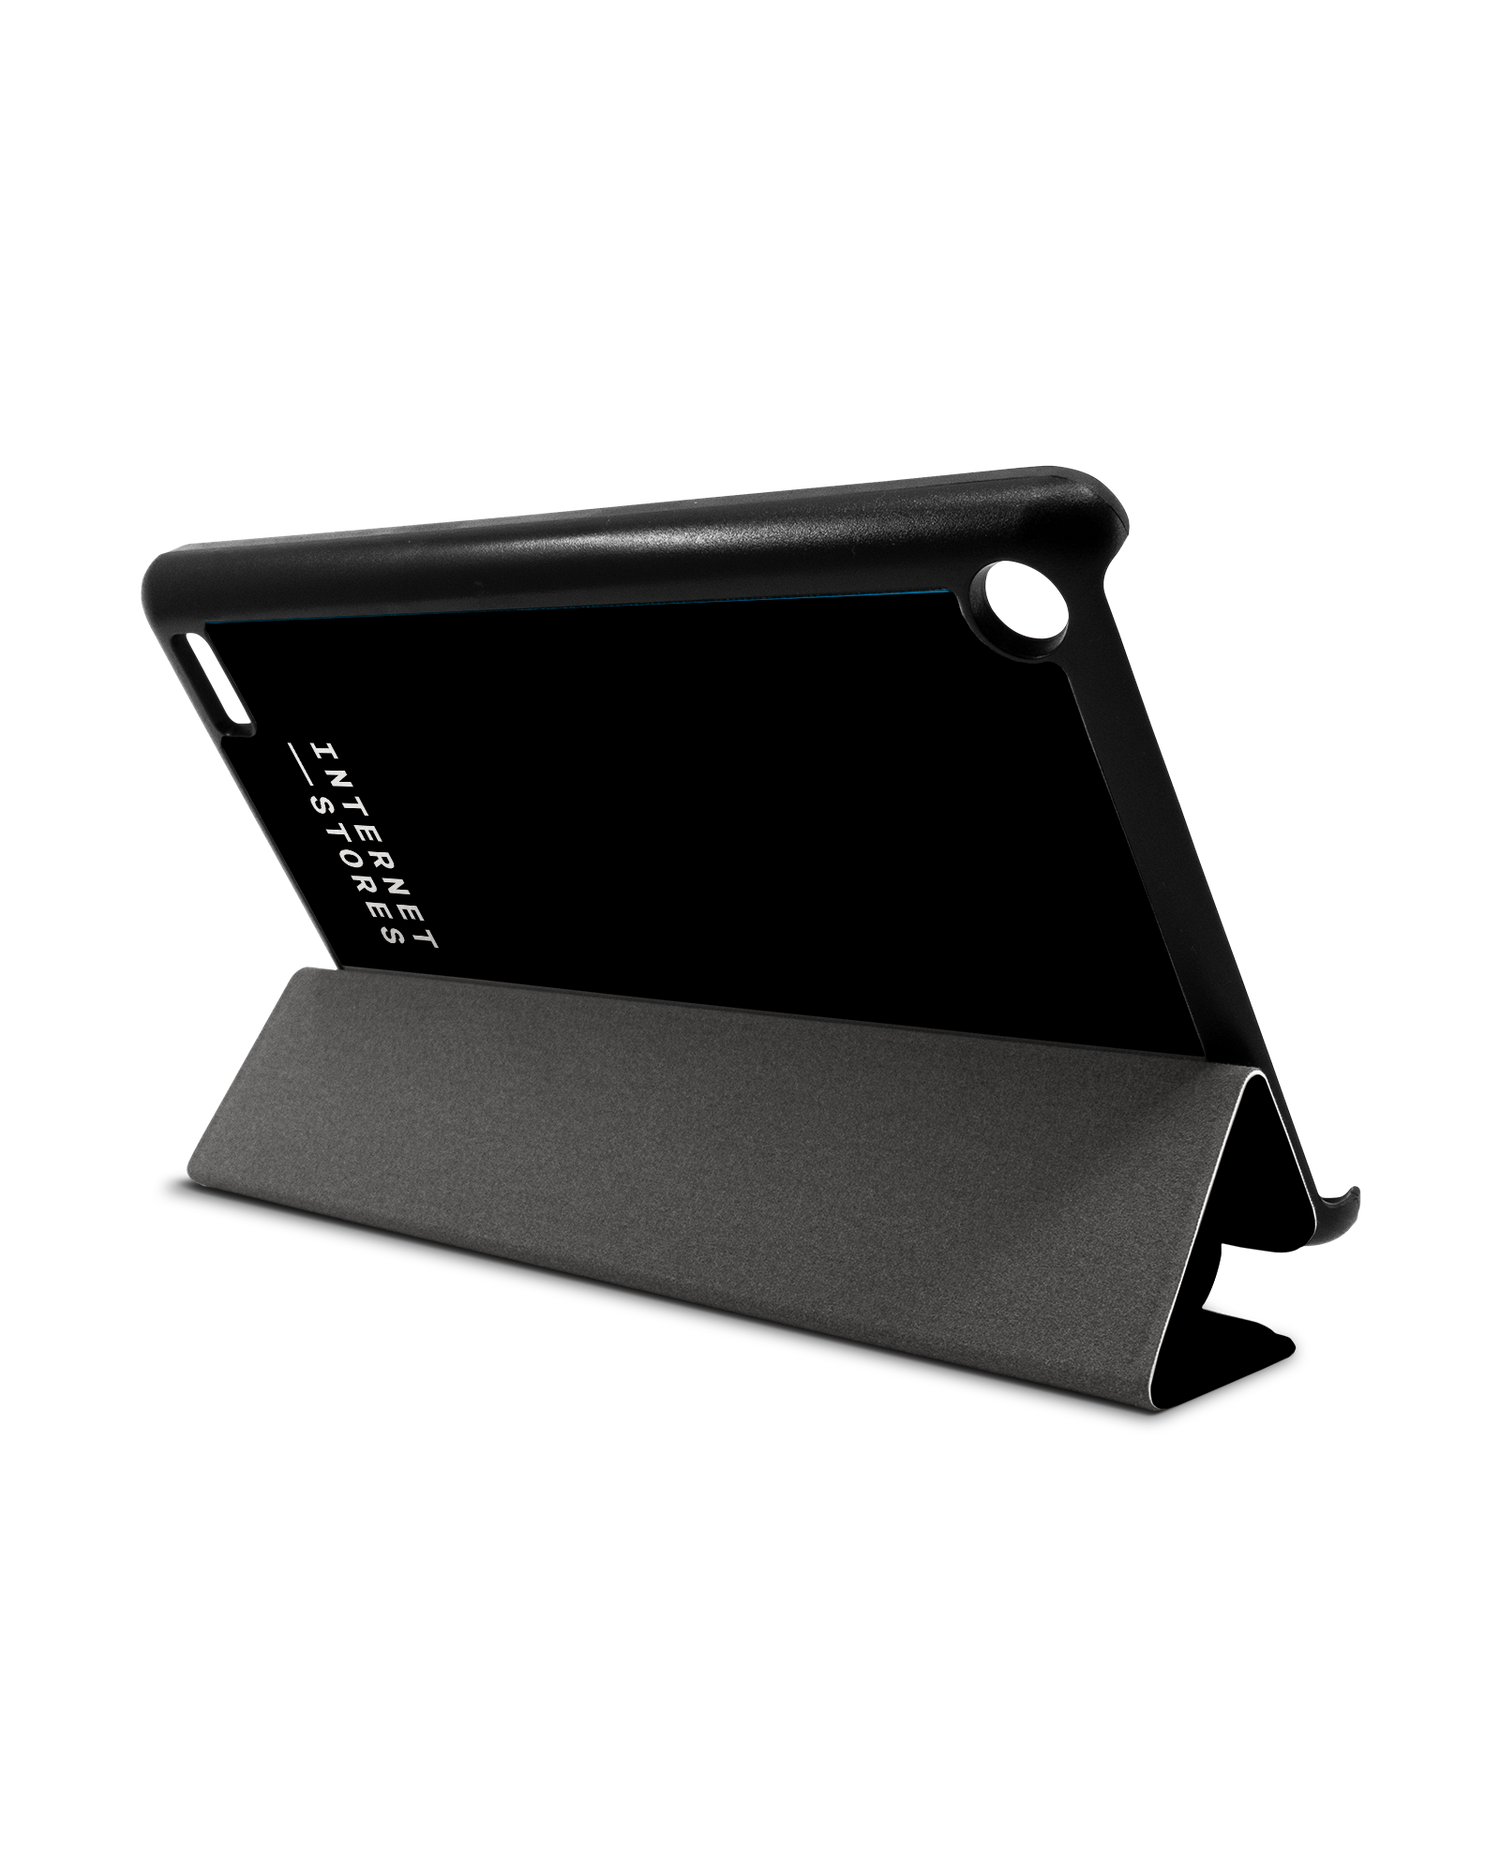 ISG Black Tablet Smart Case for Amazon Fire 7: Used as Stand